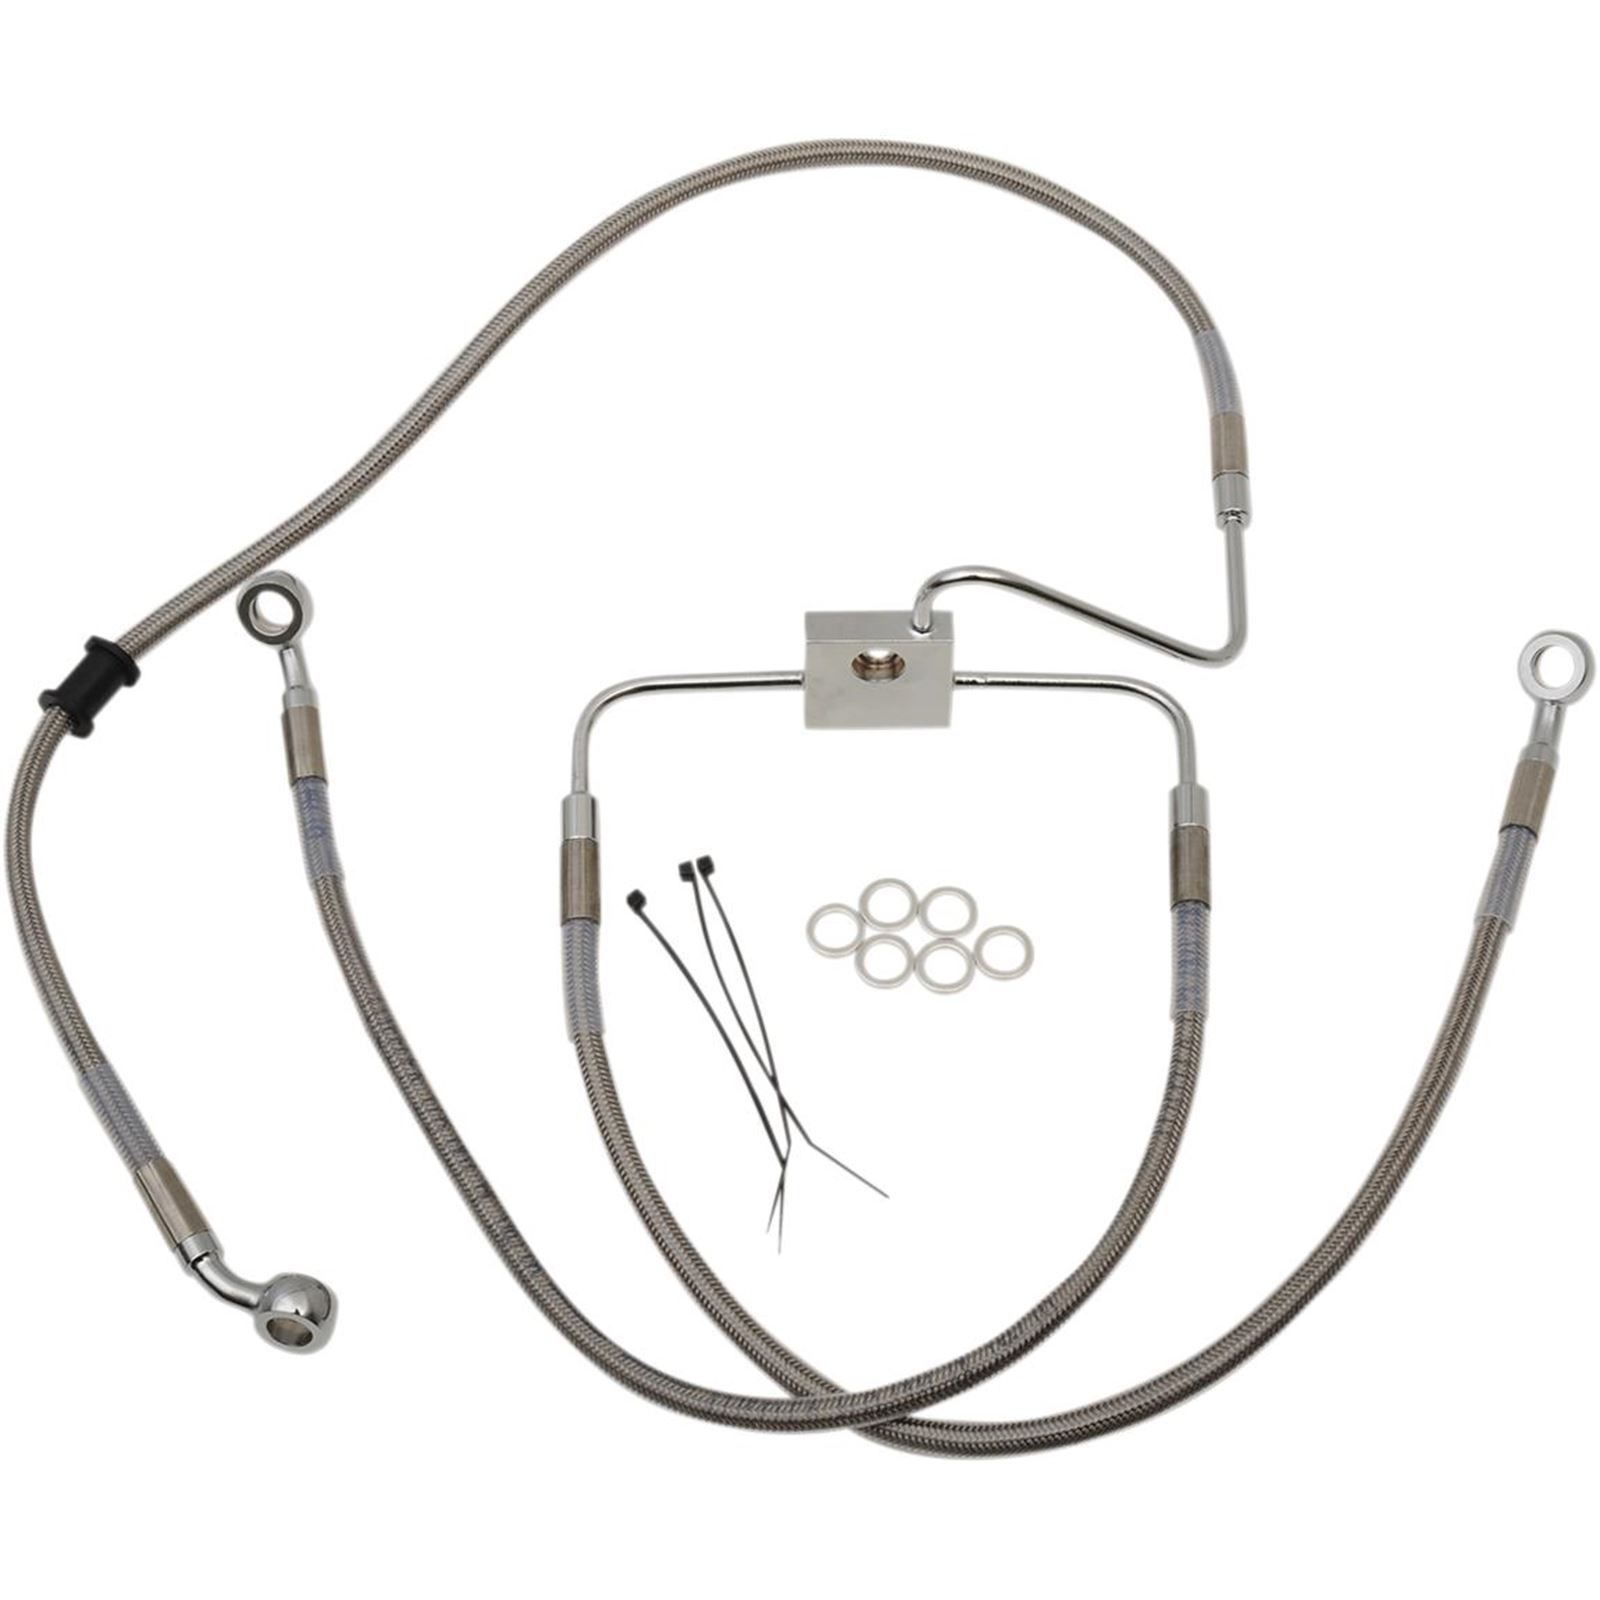 Drag Specialties Front Brake Line - XL - Stainless Steel